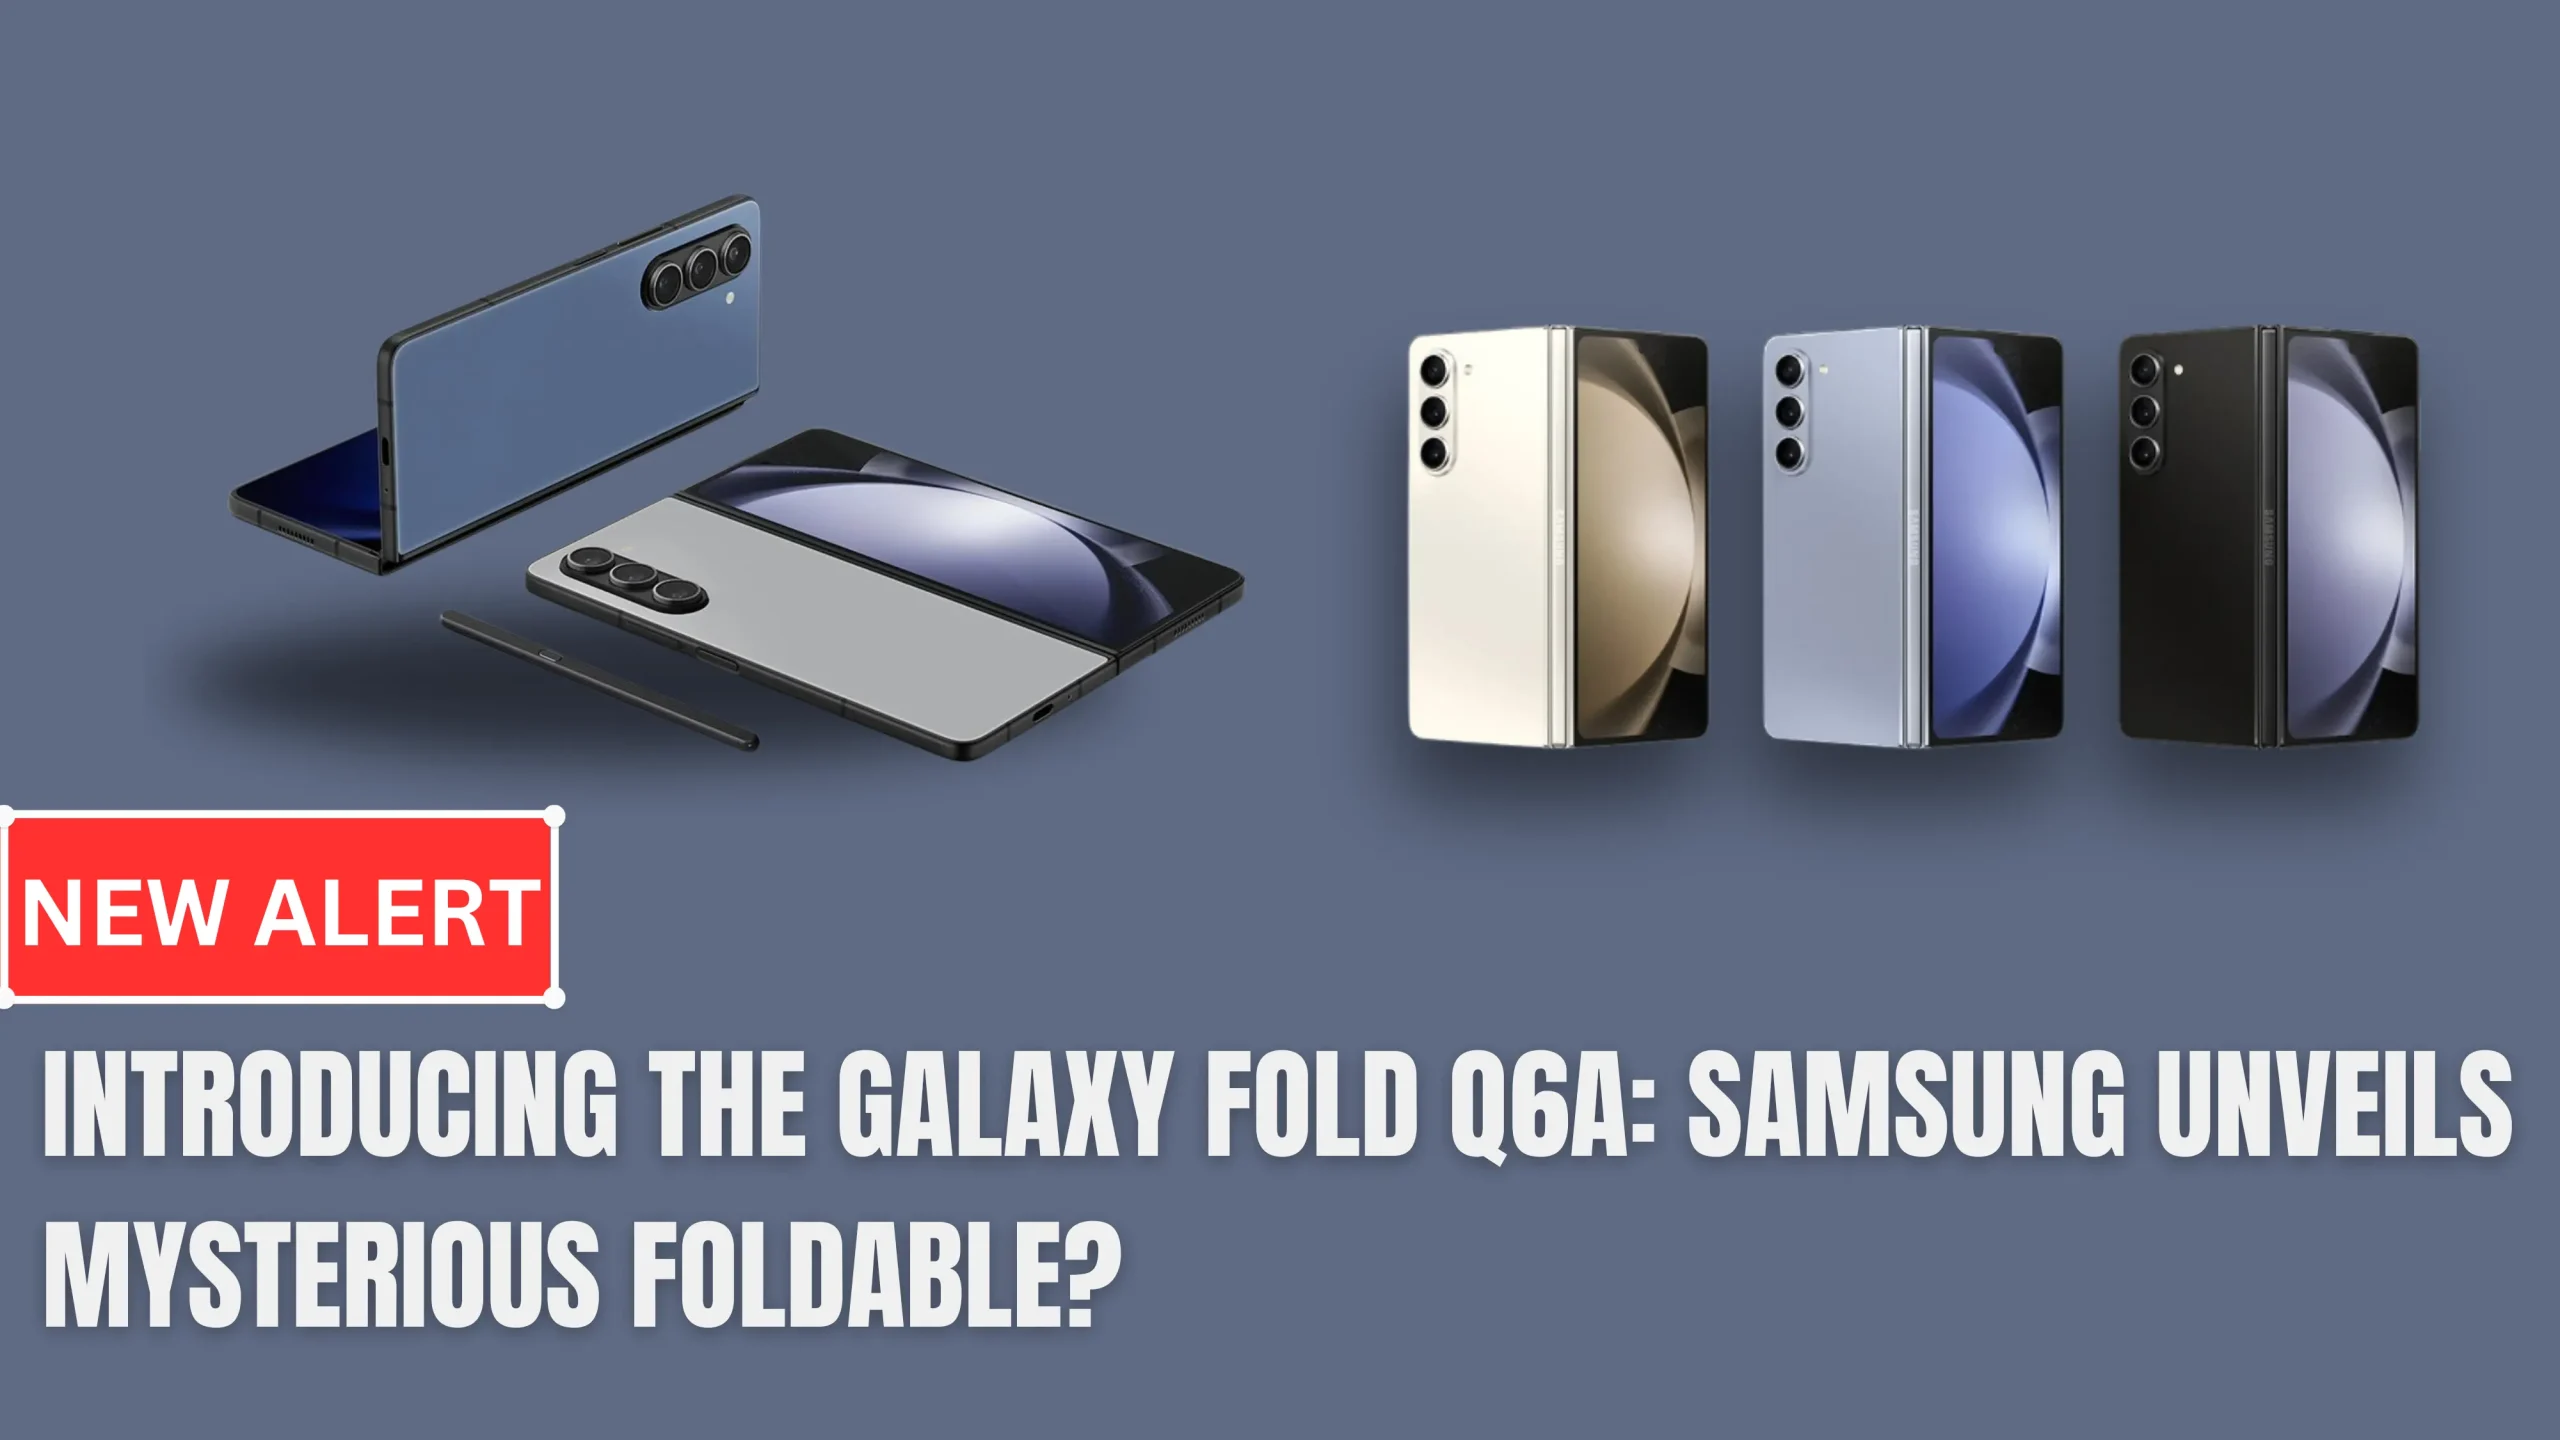 Introducing the Galaxy Fold Q6A: Samsung Unveils Mysterious Foldable?